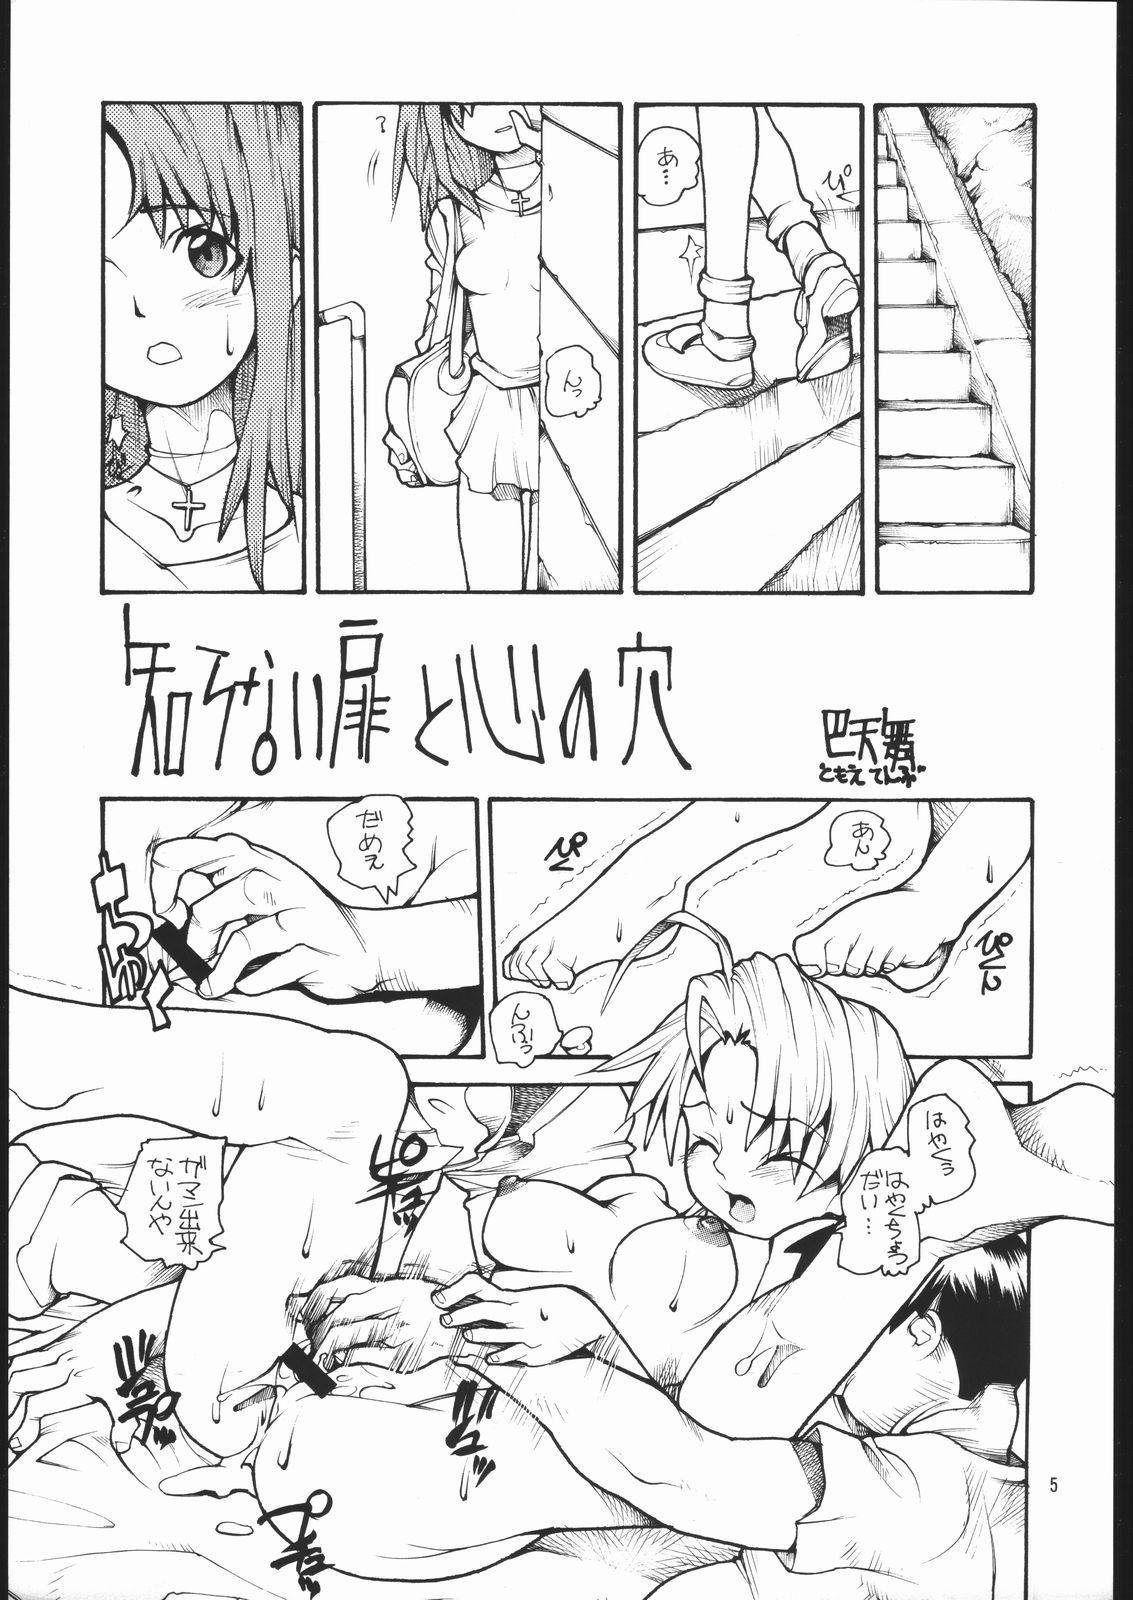 Cock Suckers HR6 | Hyper Resturant 6 - Love hina Muscle - Page 4